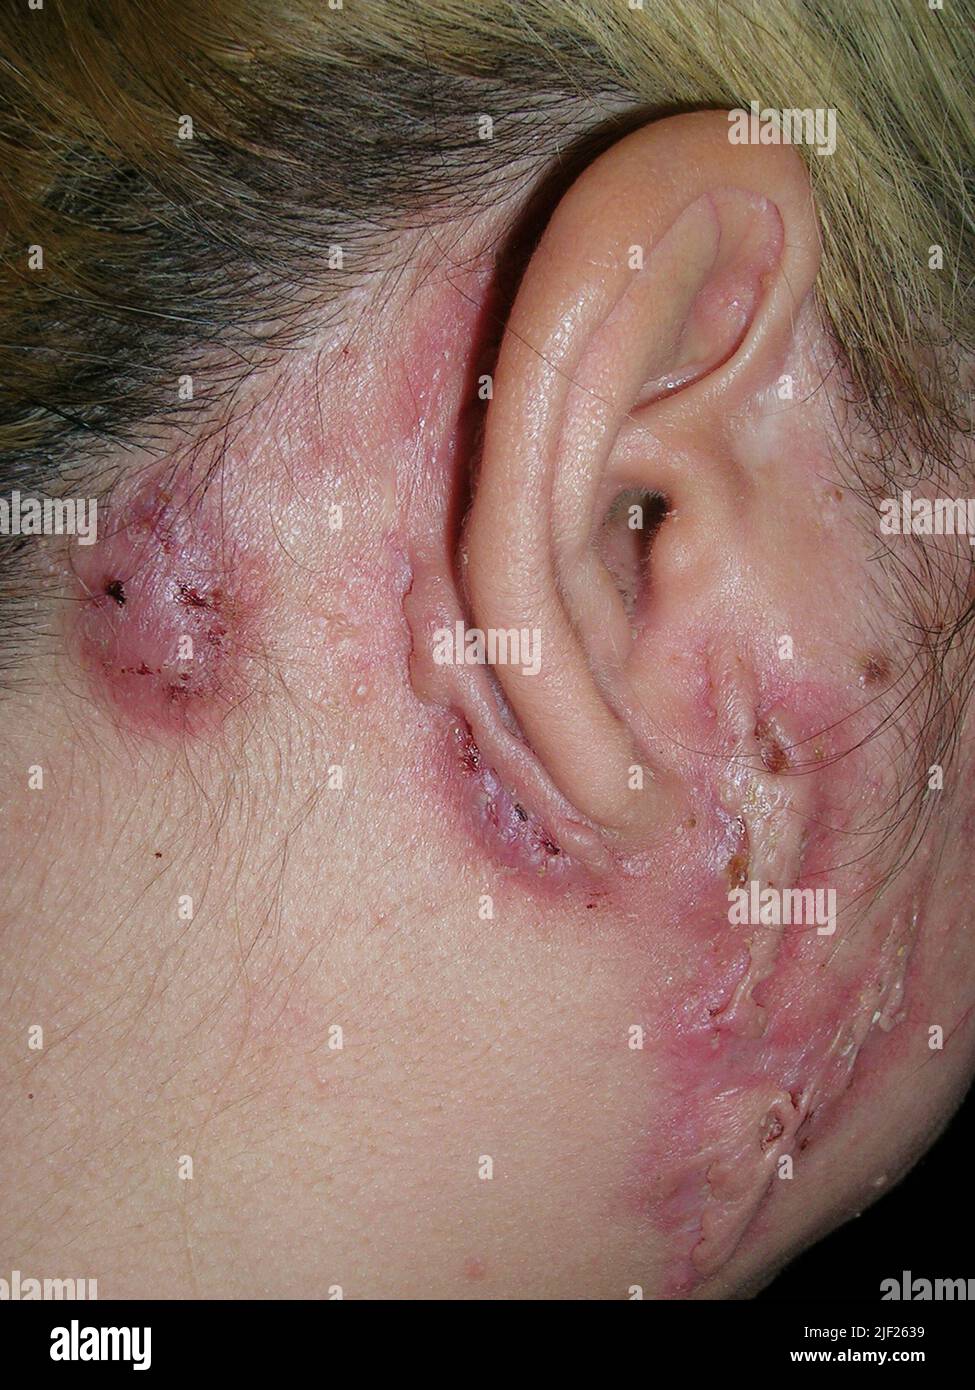 Pyoderma gangrenosum on a female patient's face. This disease causes painful ulcers on the skin. It is thought to be an autoimmune disorder, where the body's immune system attacks its own tissues. Treatment is with steroids and immunosuppressant drugs, although it can take many months for the ulcer to heal. Stock Photo